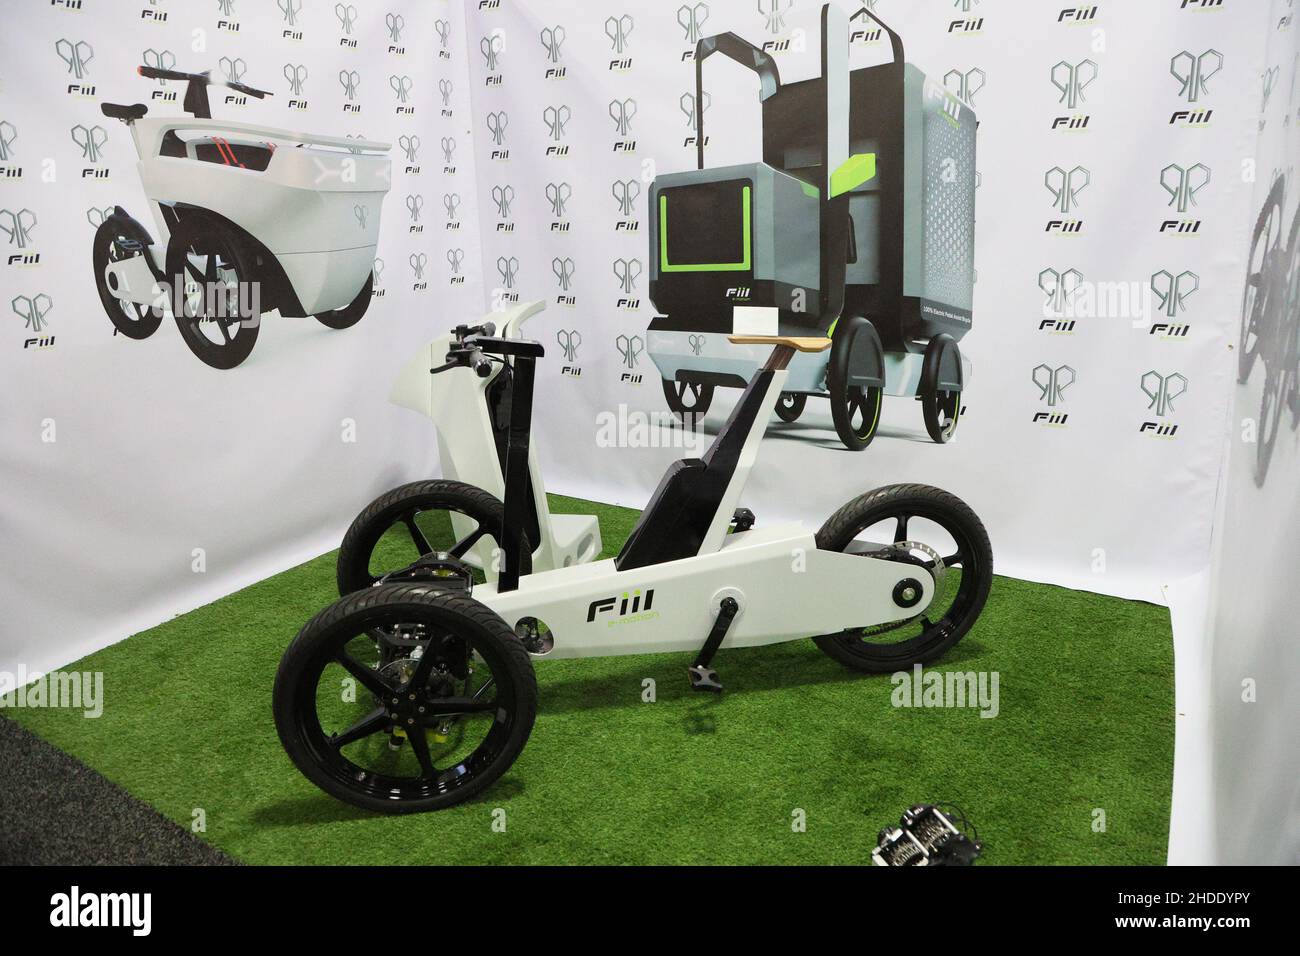 Las Vegas, United States. 05th Jan, 2022. A view of a Fiil e-motion bike on display during the 2022 International CES, at the Sands Convention Center in Las Vegas, Nevada on Wednesday, January 5, 2022. Designed to upset the traditional last mile industry by transforming the cargo bike into a highly next generation of last mile delivery. Photo by James Atoa/UPI Credit: UPI/Alamy Live News Stock Photo